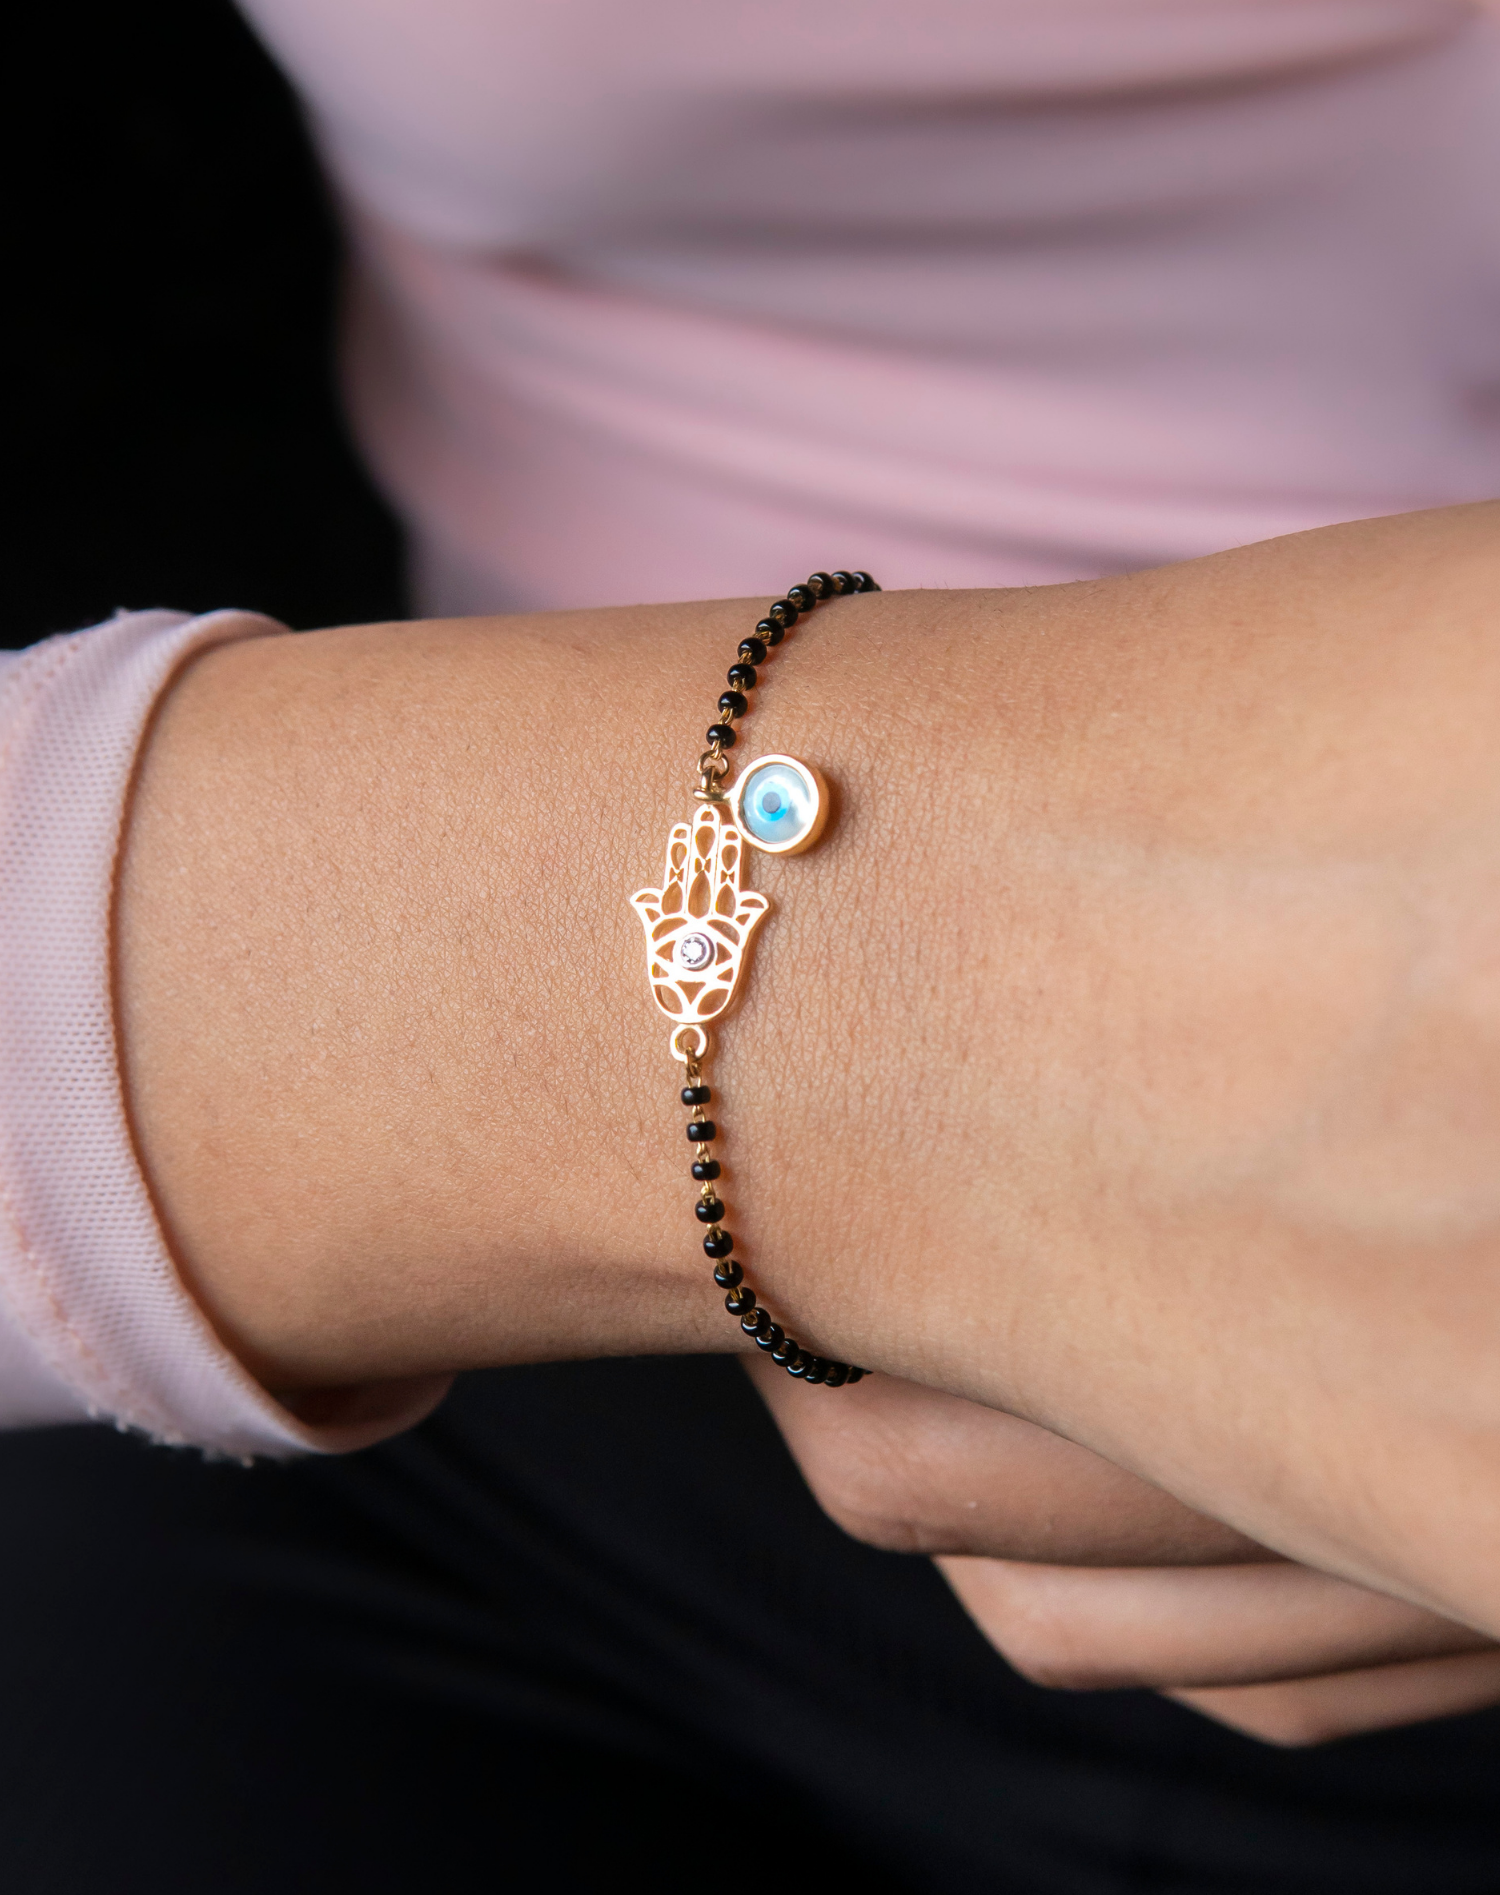 New In: Evil Eye Mangalsutra Bracelet With Customisable Initial 🙌🏻 Now  add more meaning to your love symbol 🥰 Shop link in bio or… | Instagram